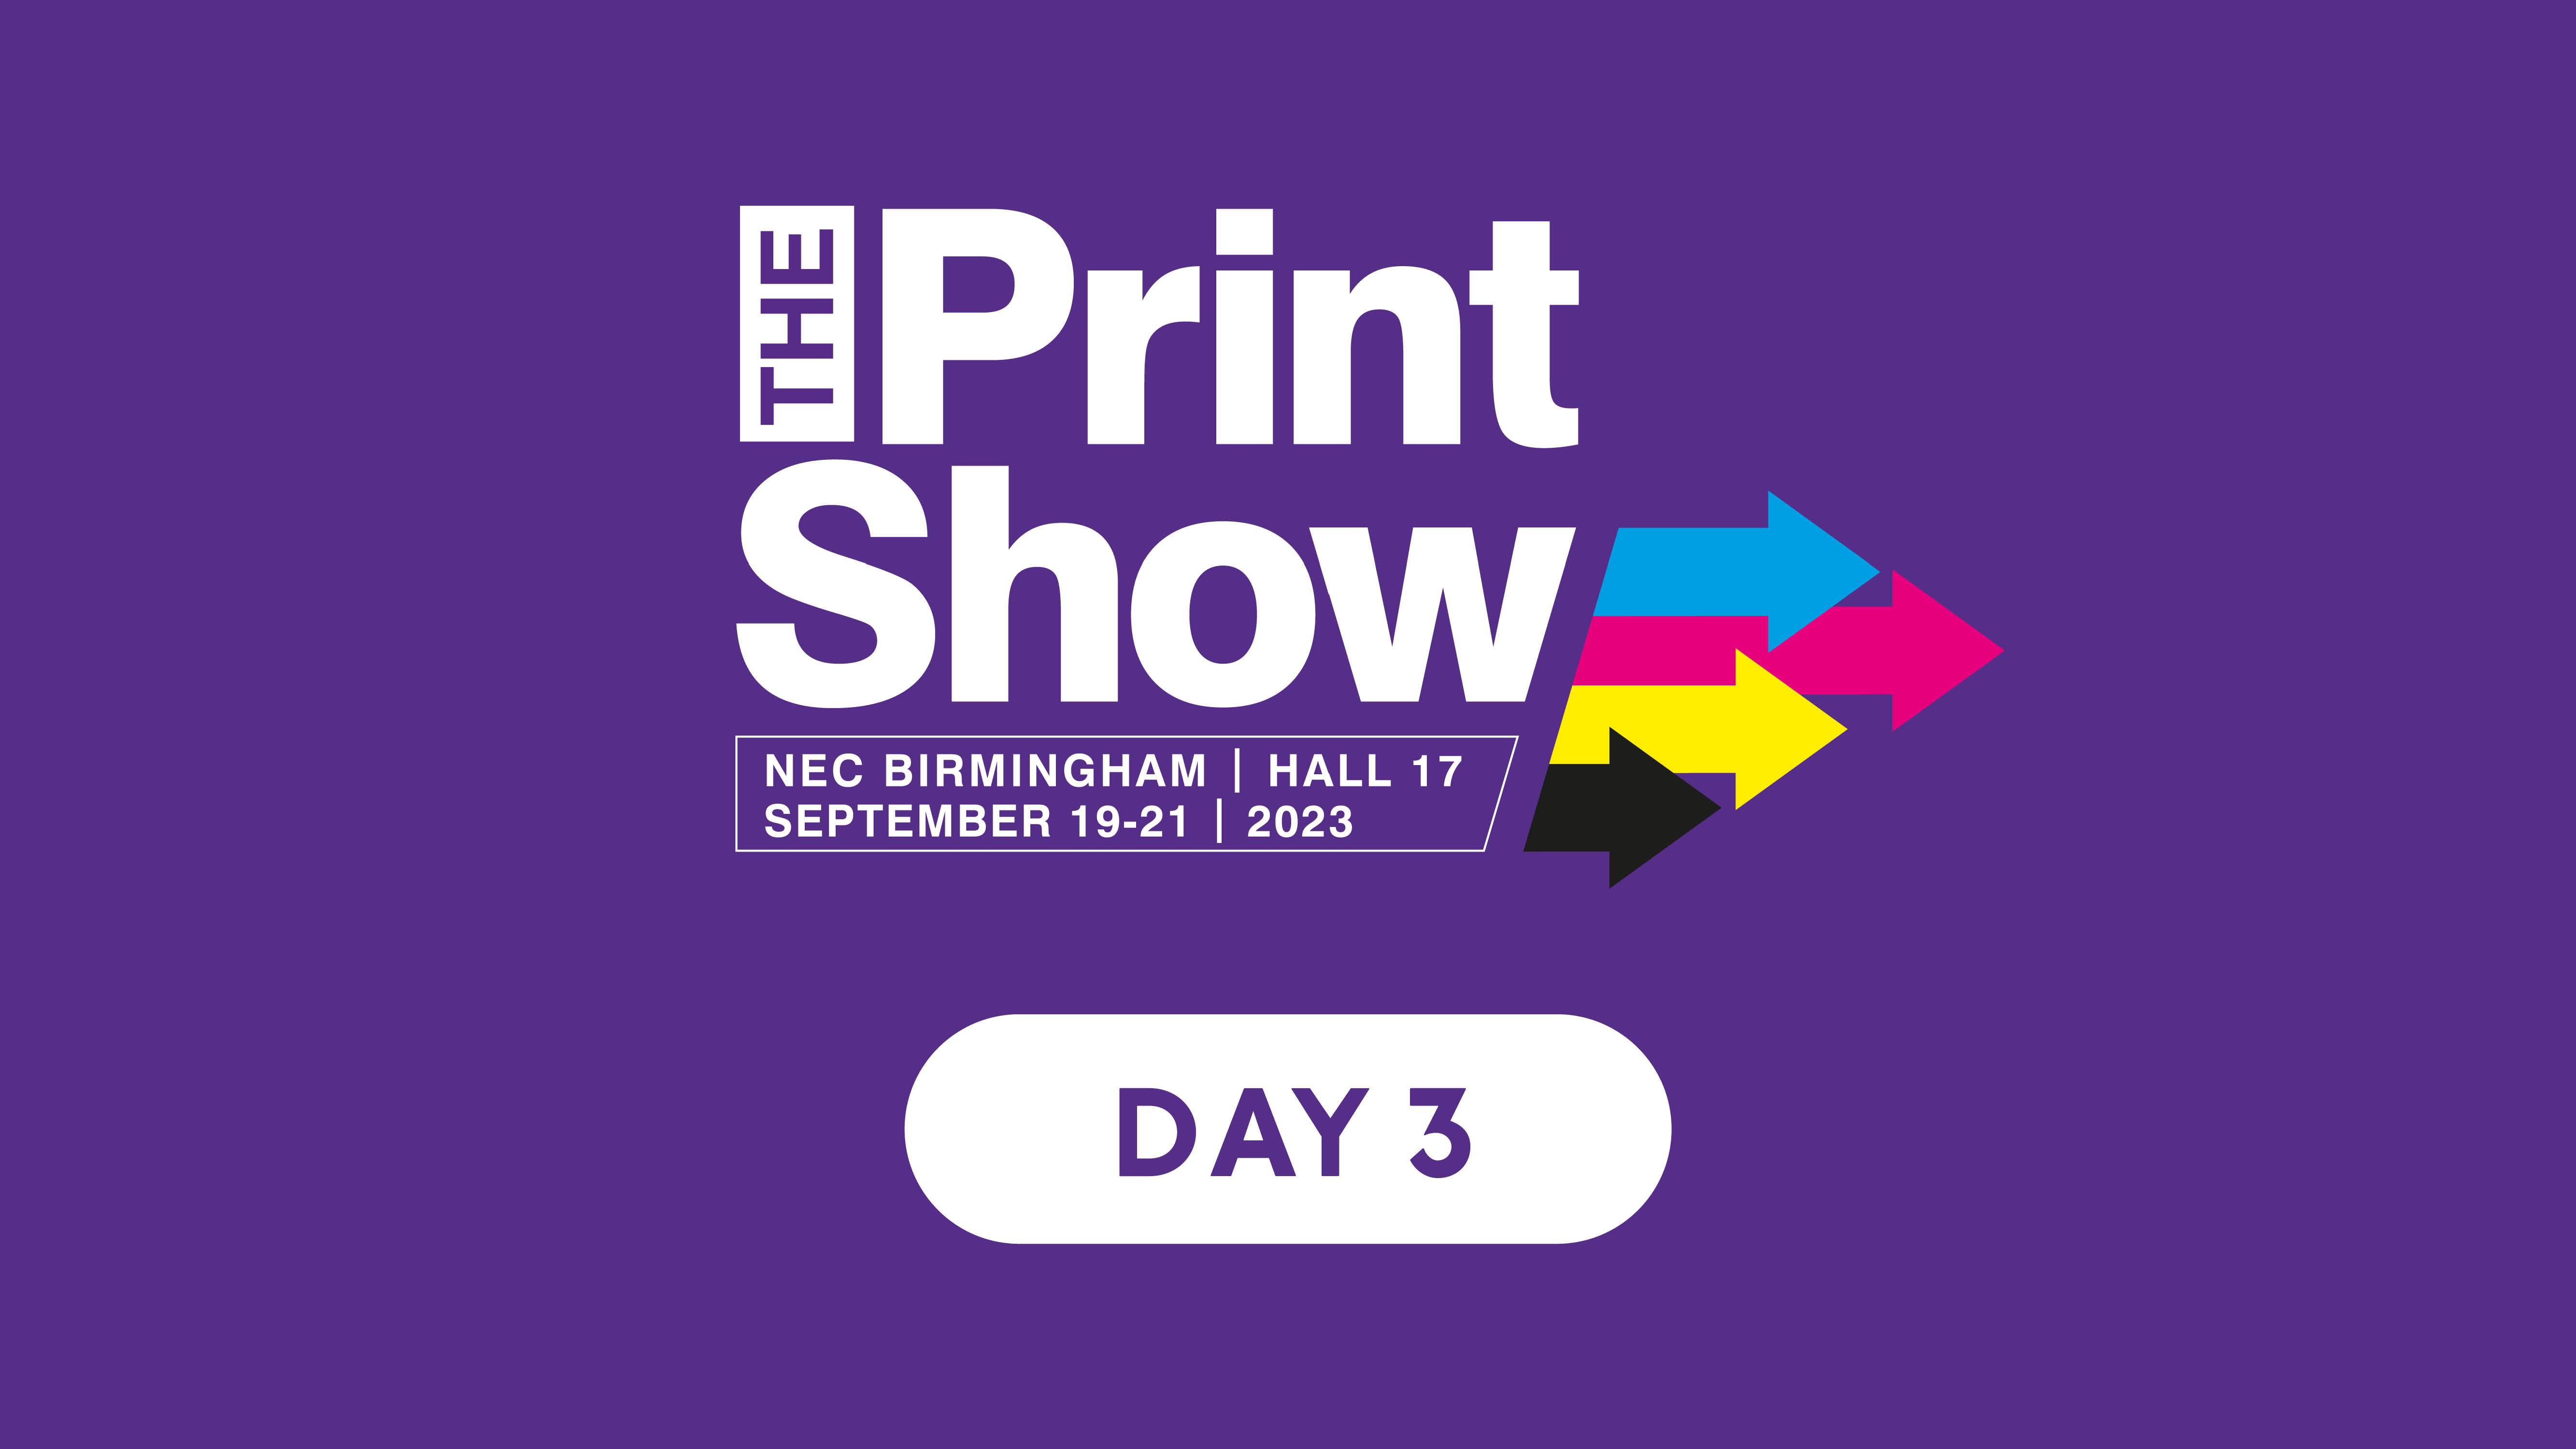 The Print Show 2023 - Day 3